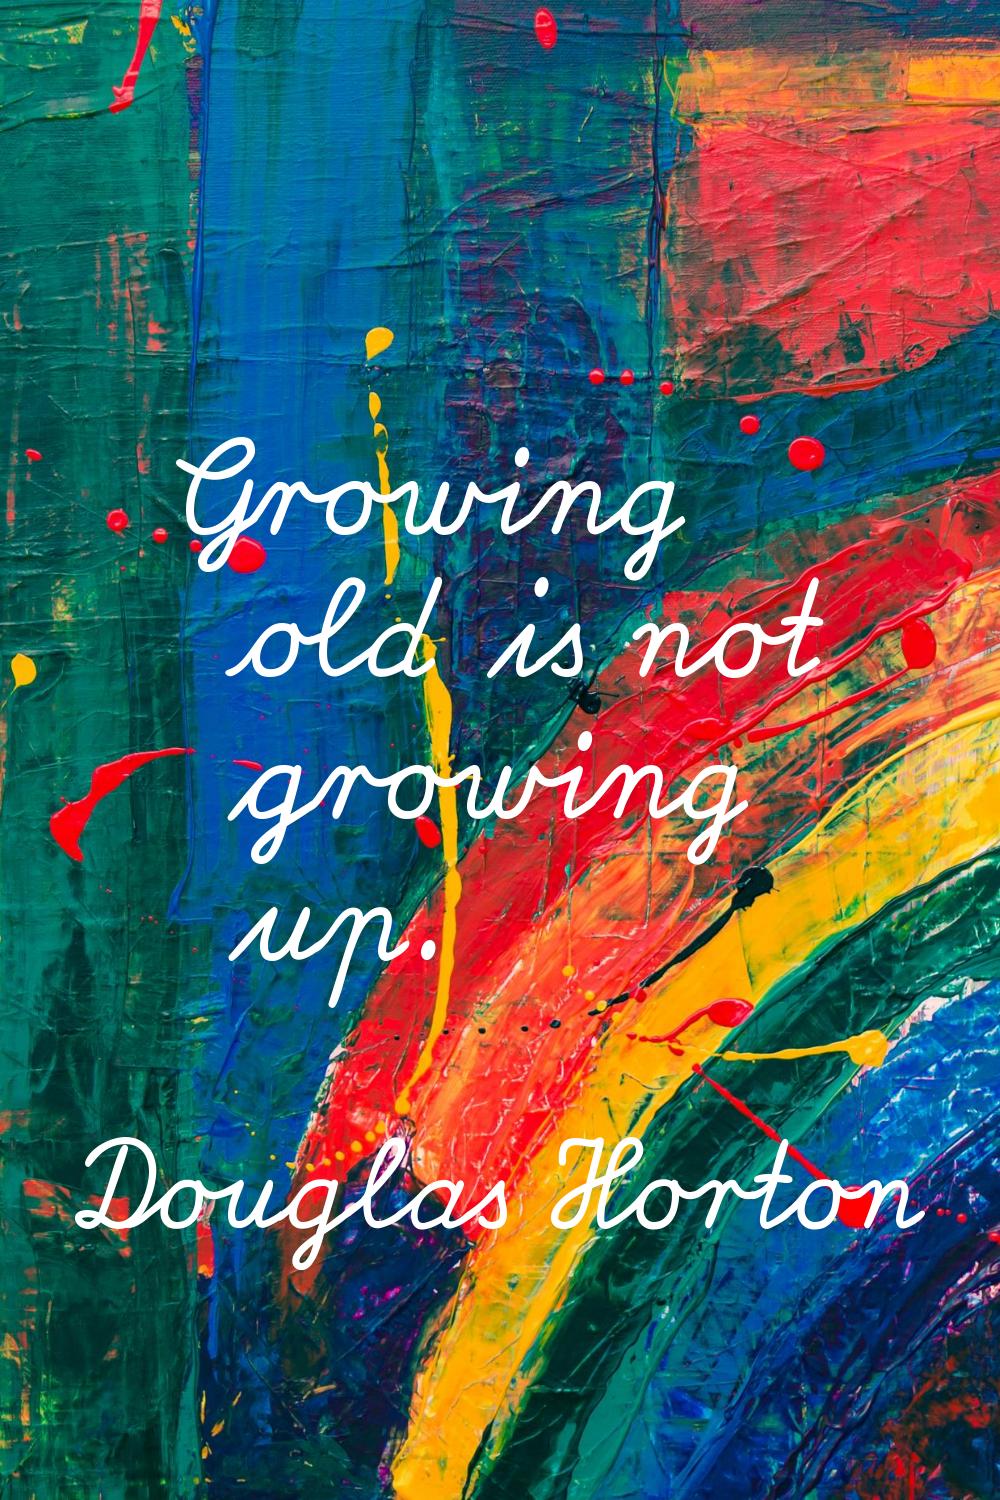 Growing old is not growing up.